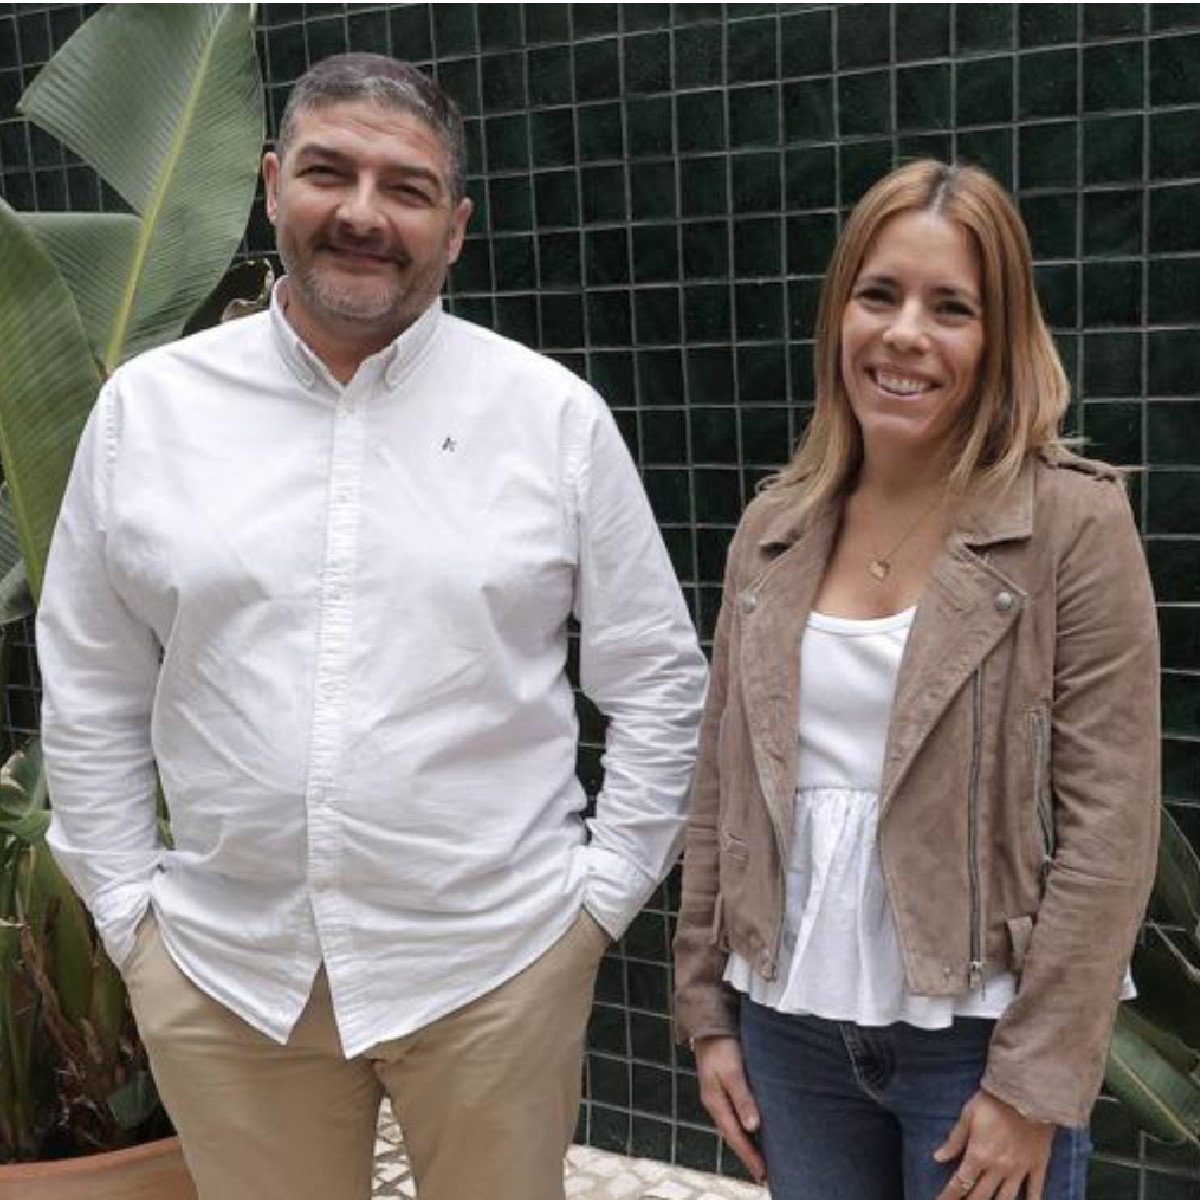 Paloma Valenzuela is a Les Roches alumna making her mark on the culinary world. She is the chef and co-owner of Zelai, a leader in the new Sevillian cuisine. Read the interview here: brnw.ch/21wBW7n #LesRochesAlumni